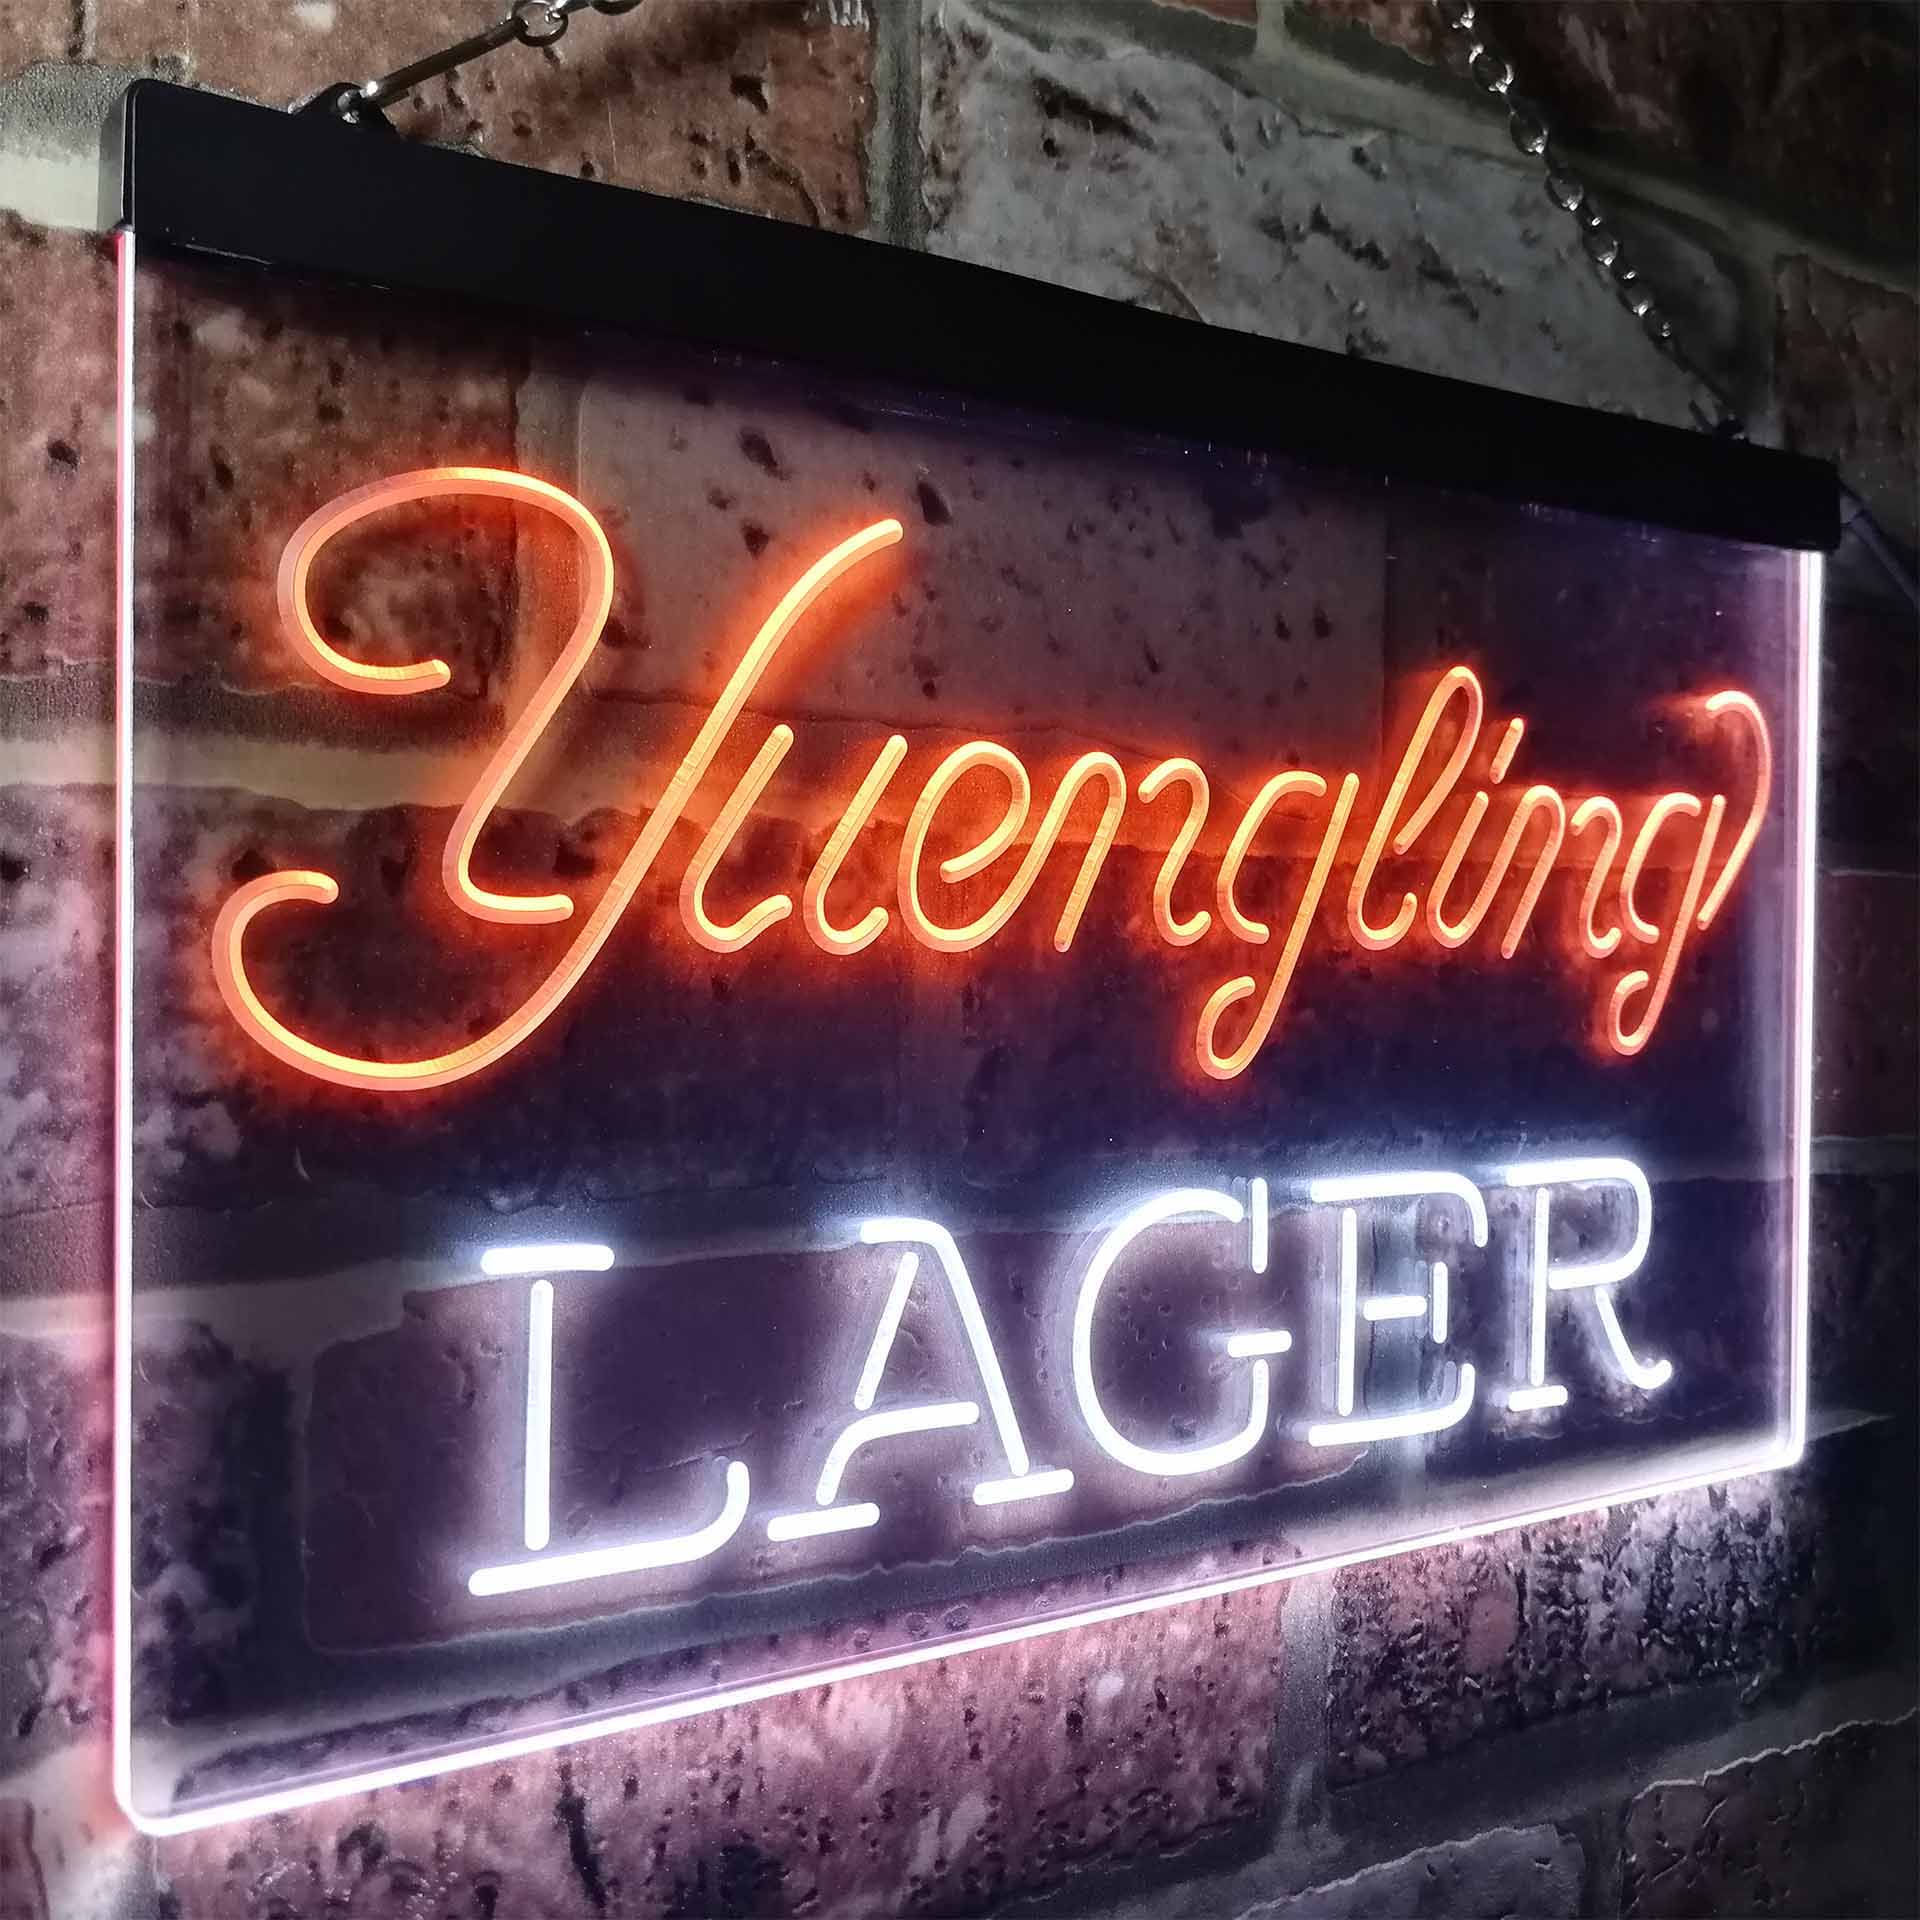 Yuengling Larger Beer Neon-Like LED Sign